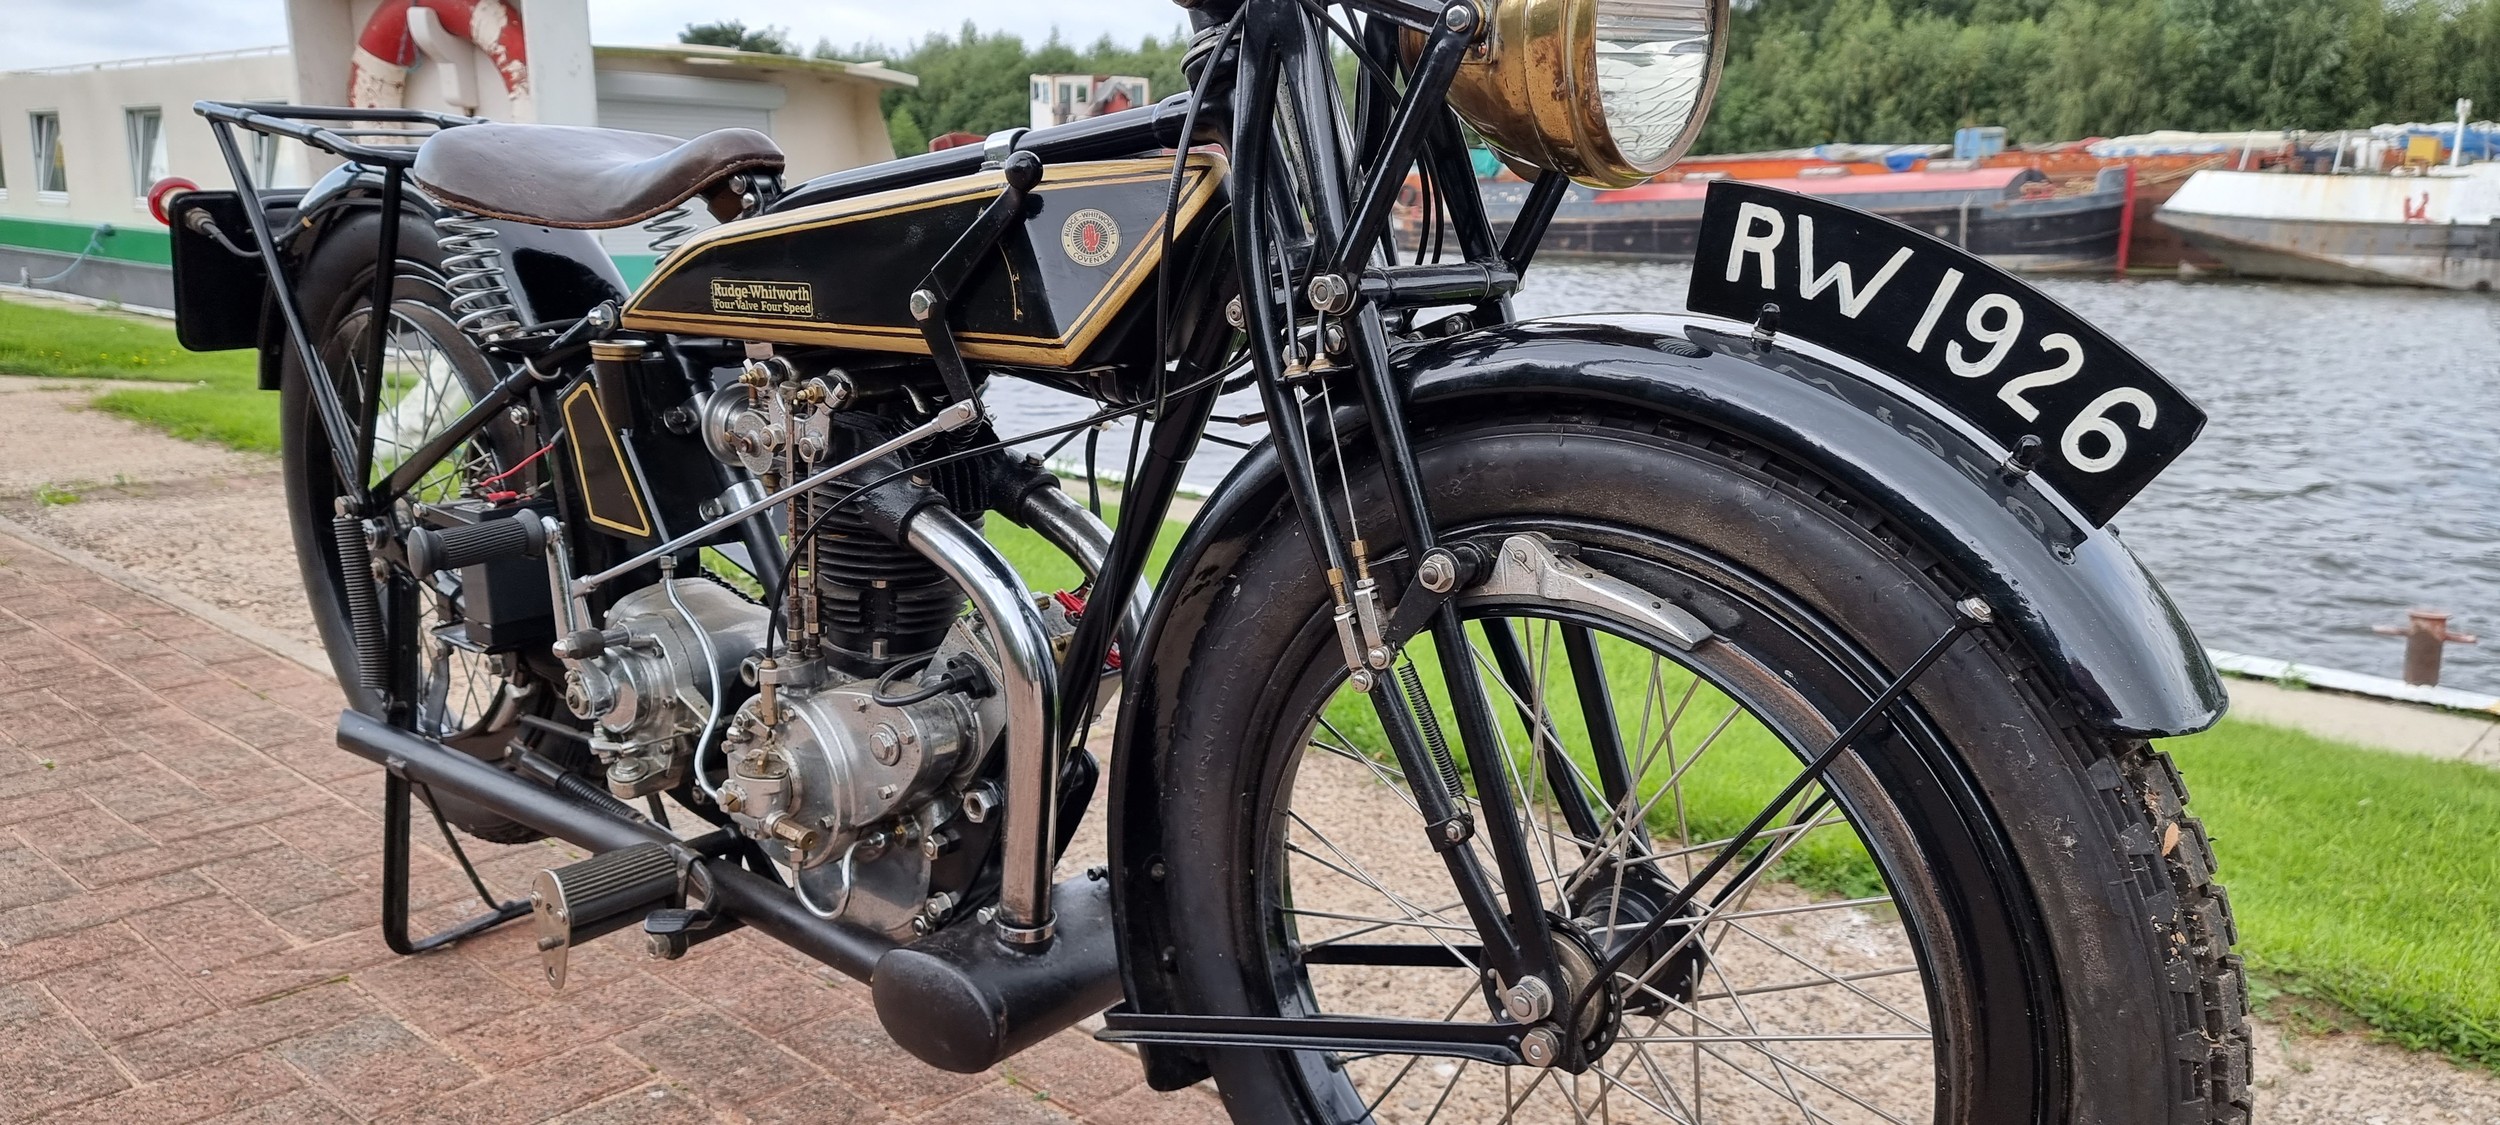 1926 Rudge Whitworth Four Valve Four Speed, Registration number not registered. Frame number painted - Image 18 of 18